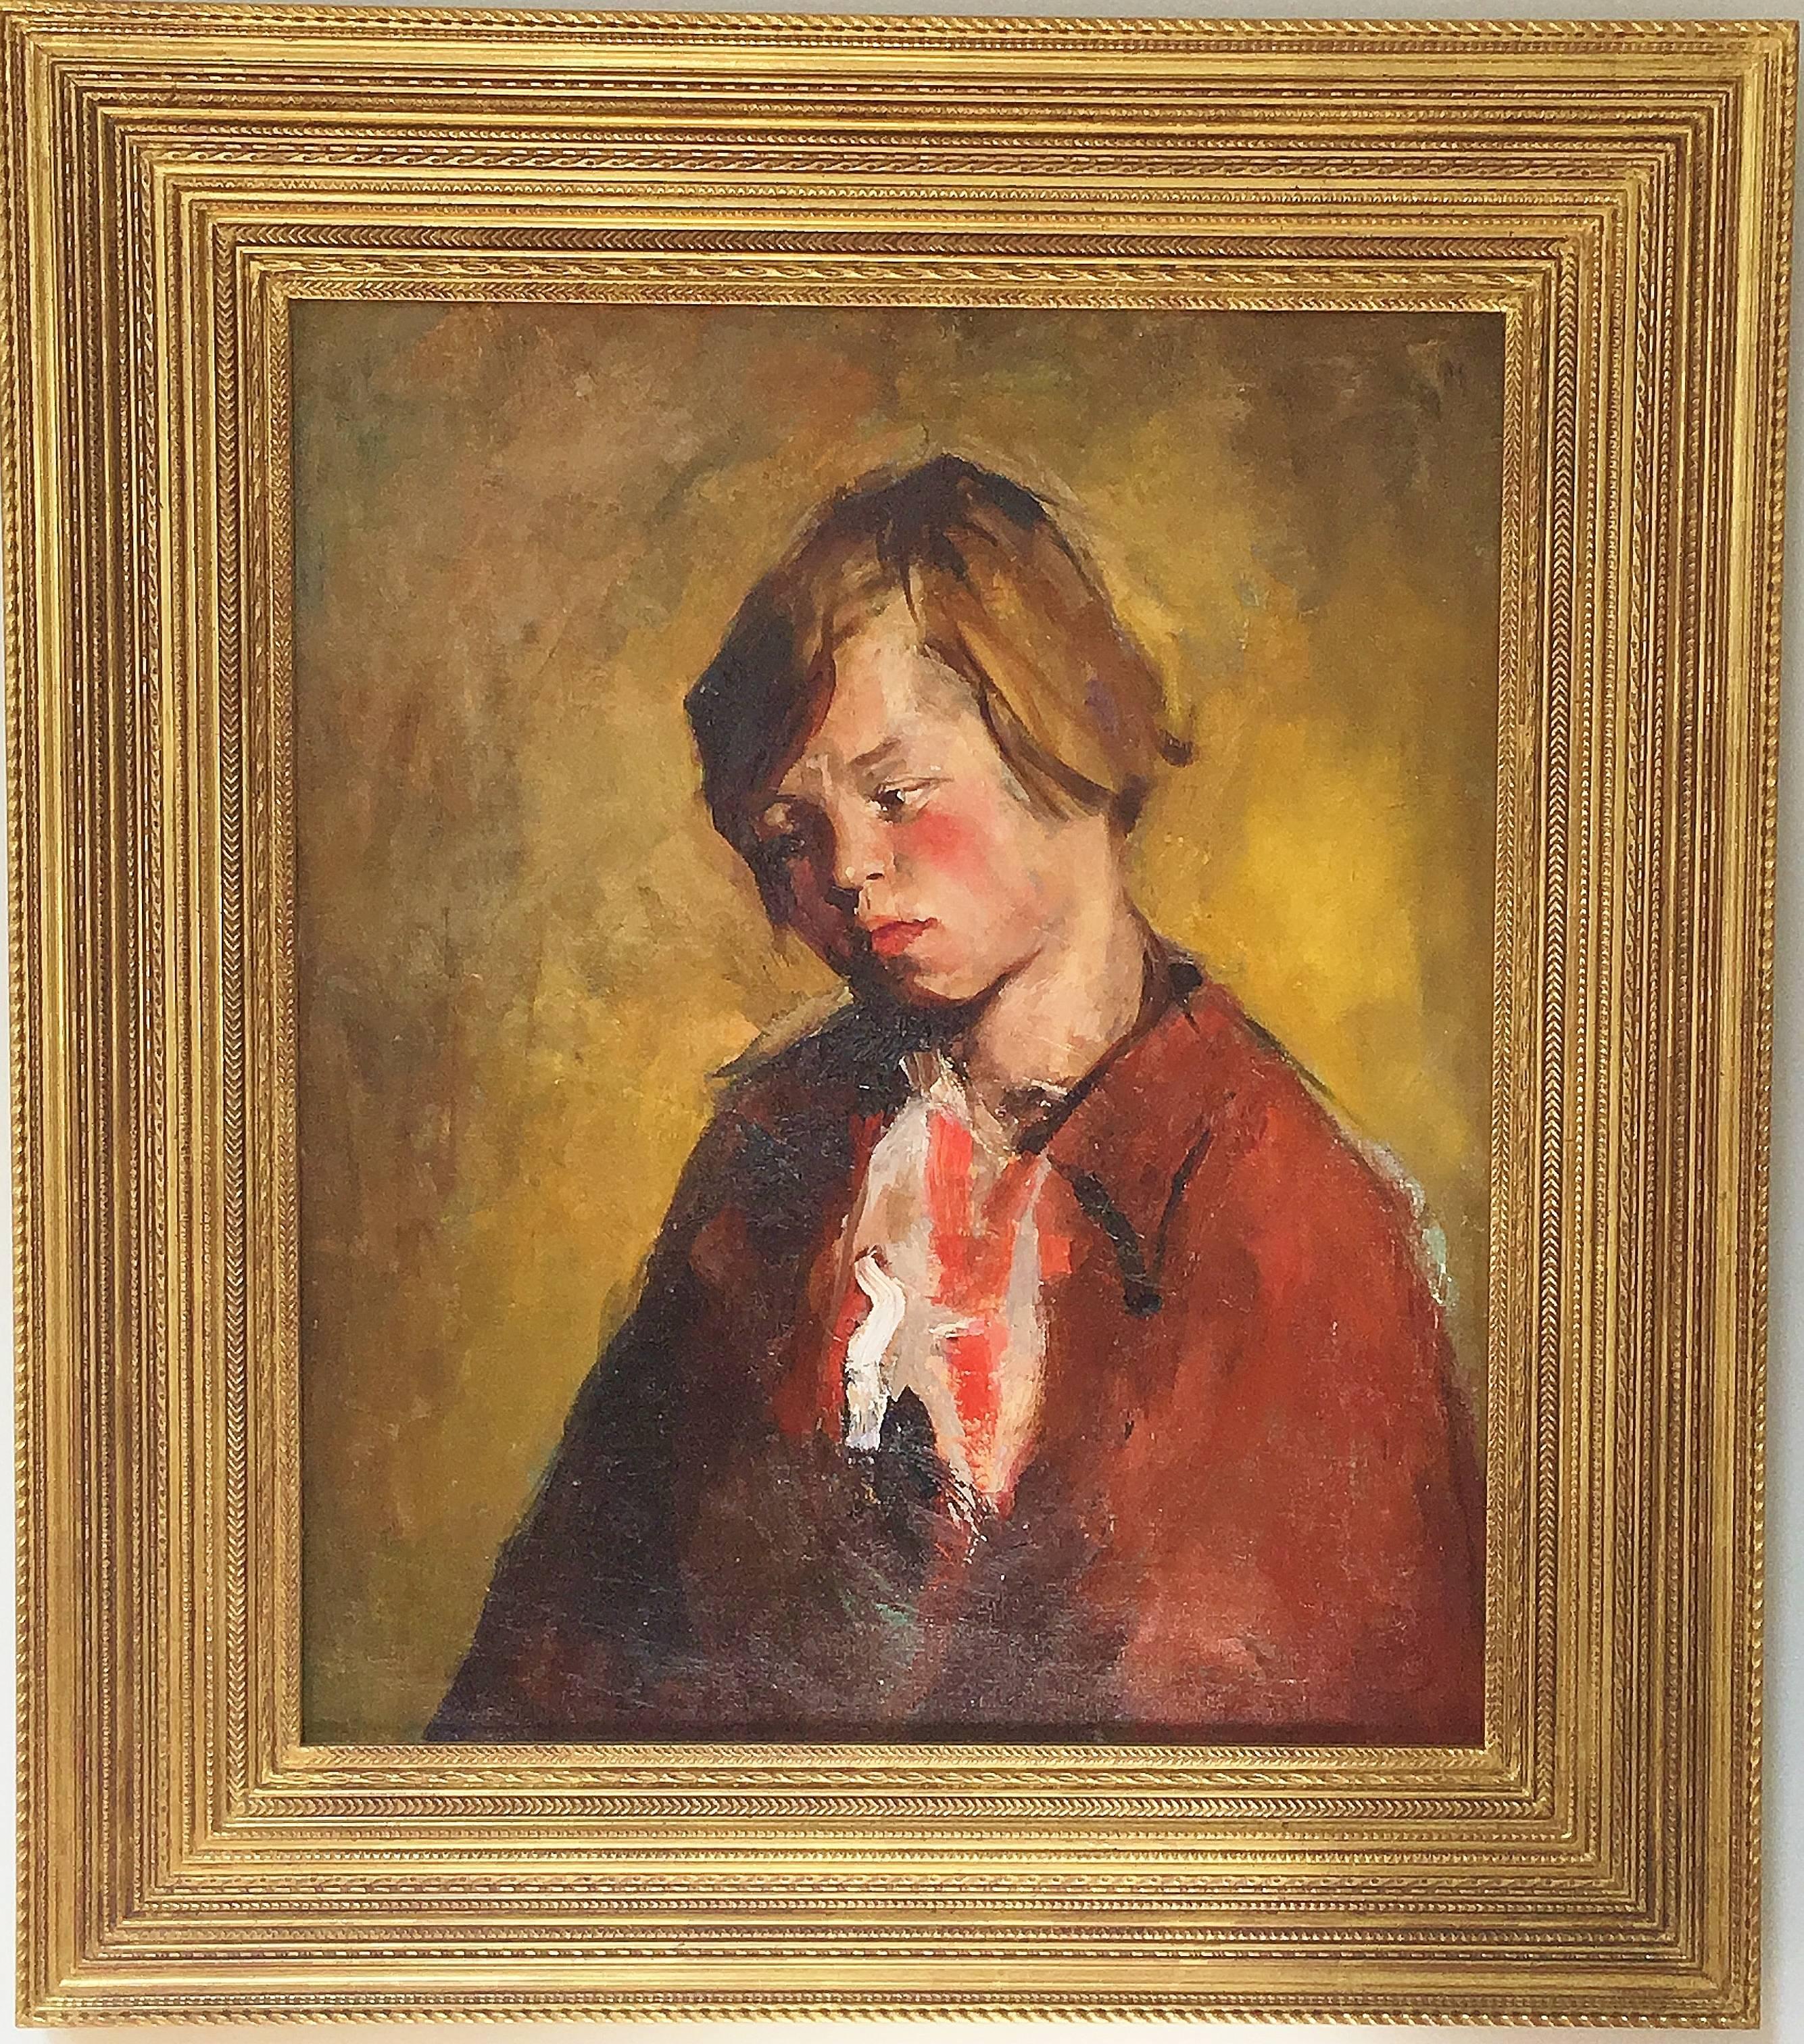 Young Boy - Painting by Margery Austen Ryerson